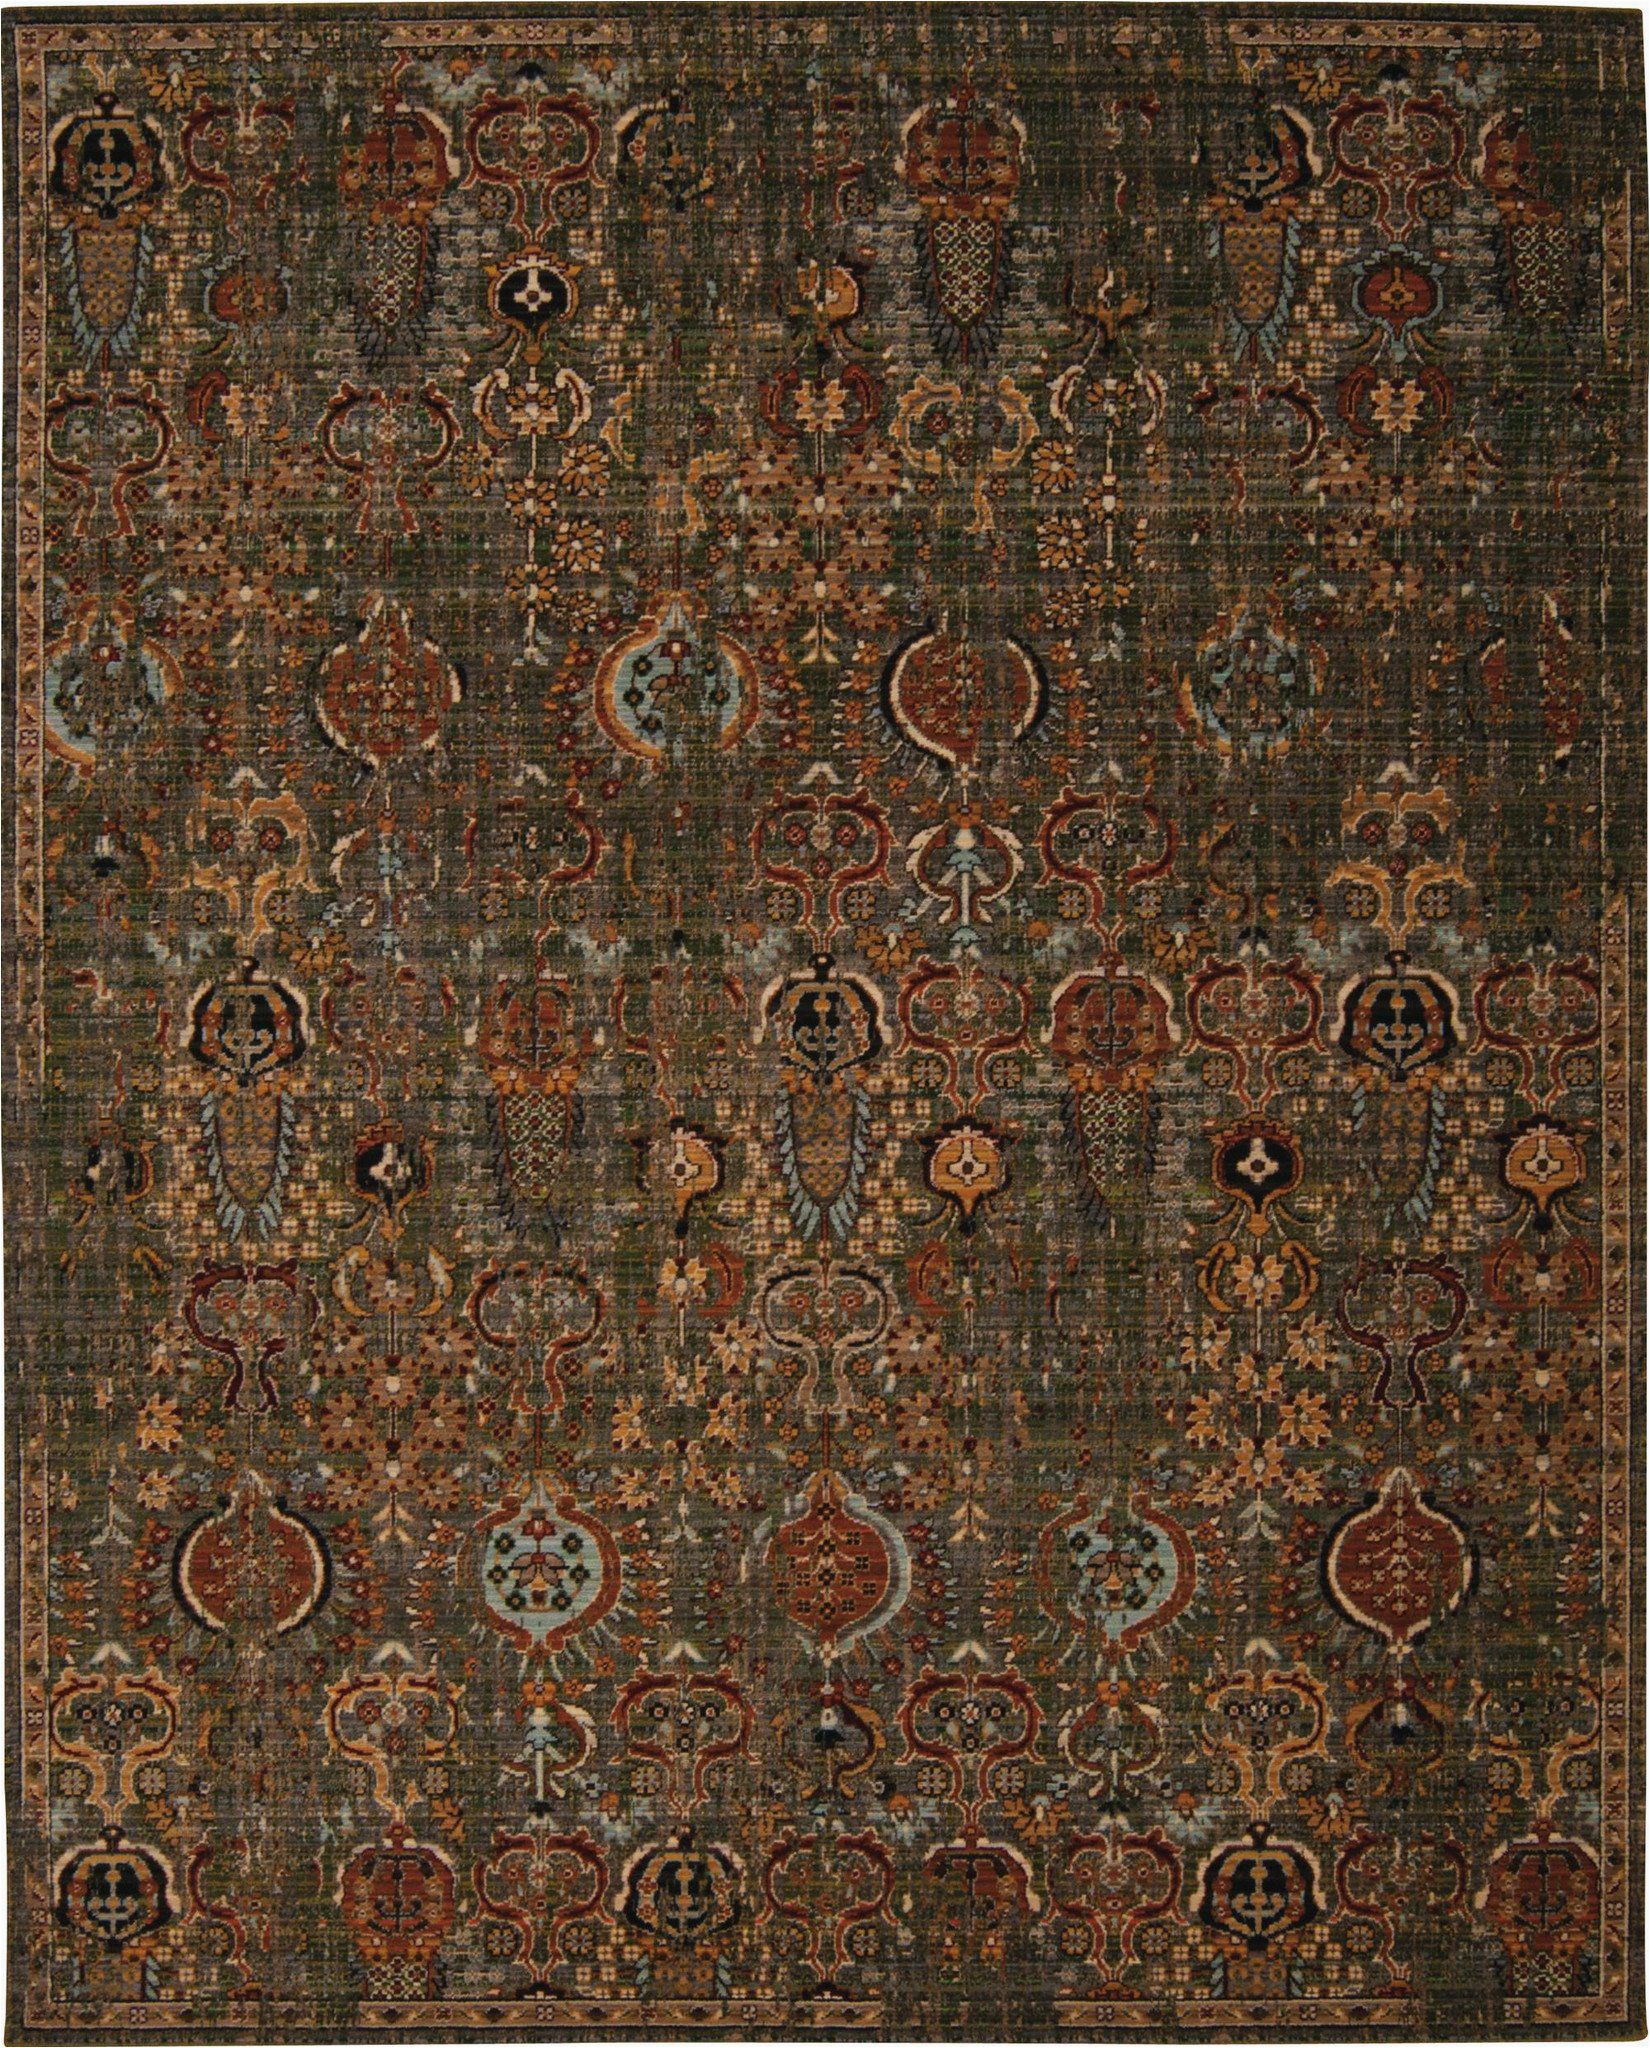 Green and Gold area Rugs Timeless Green Gold Rug 4 Size Options